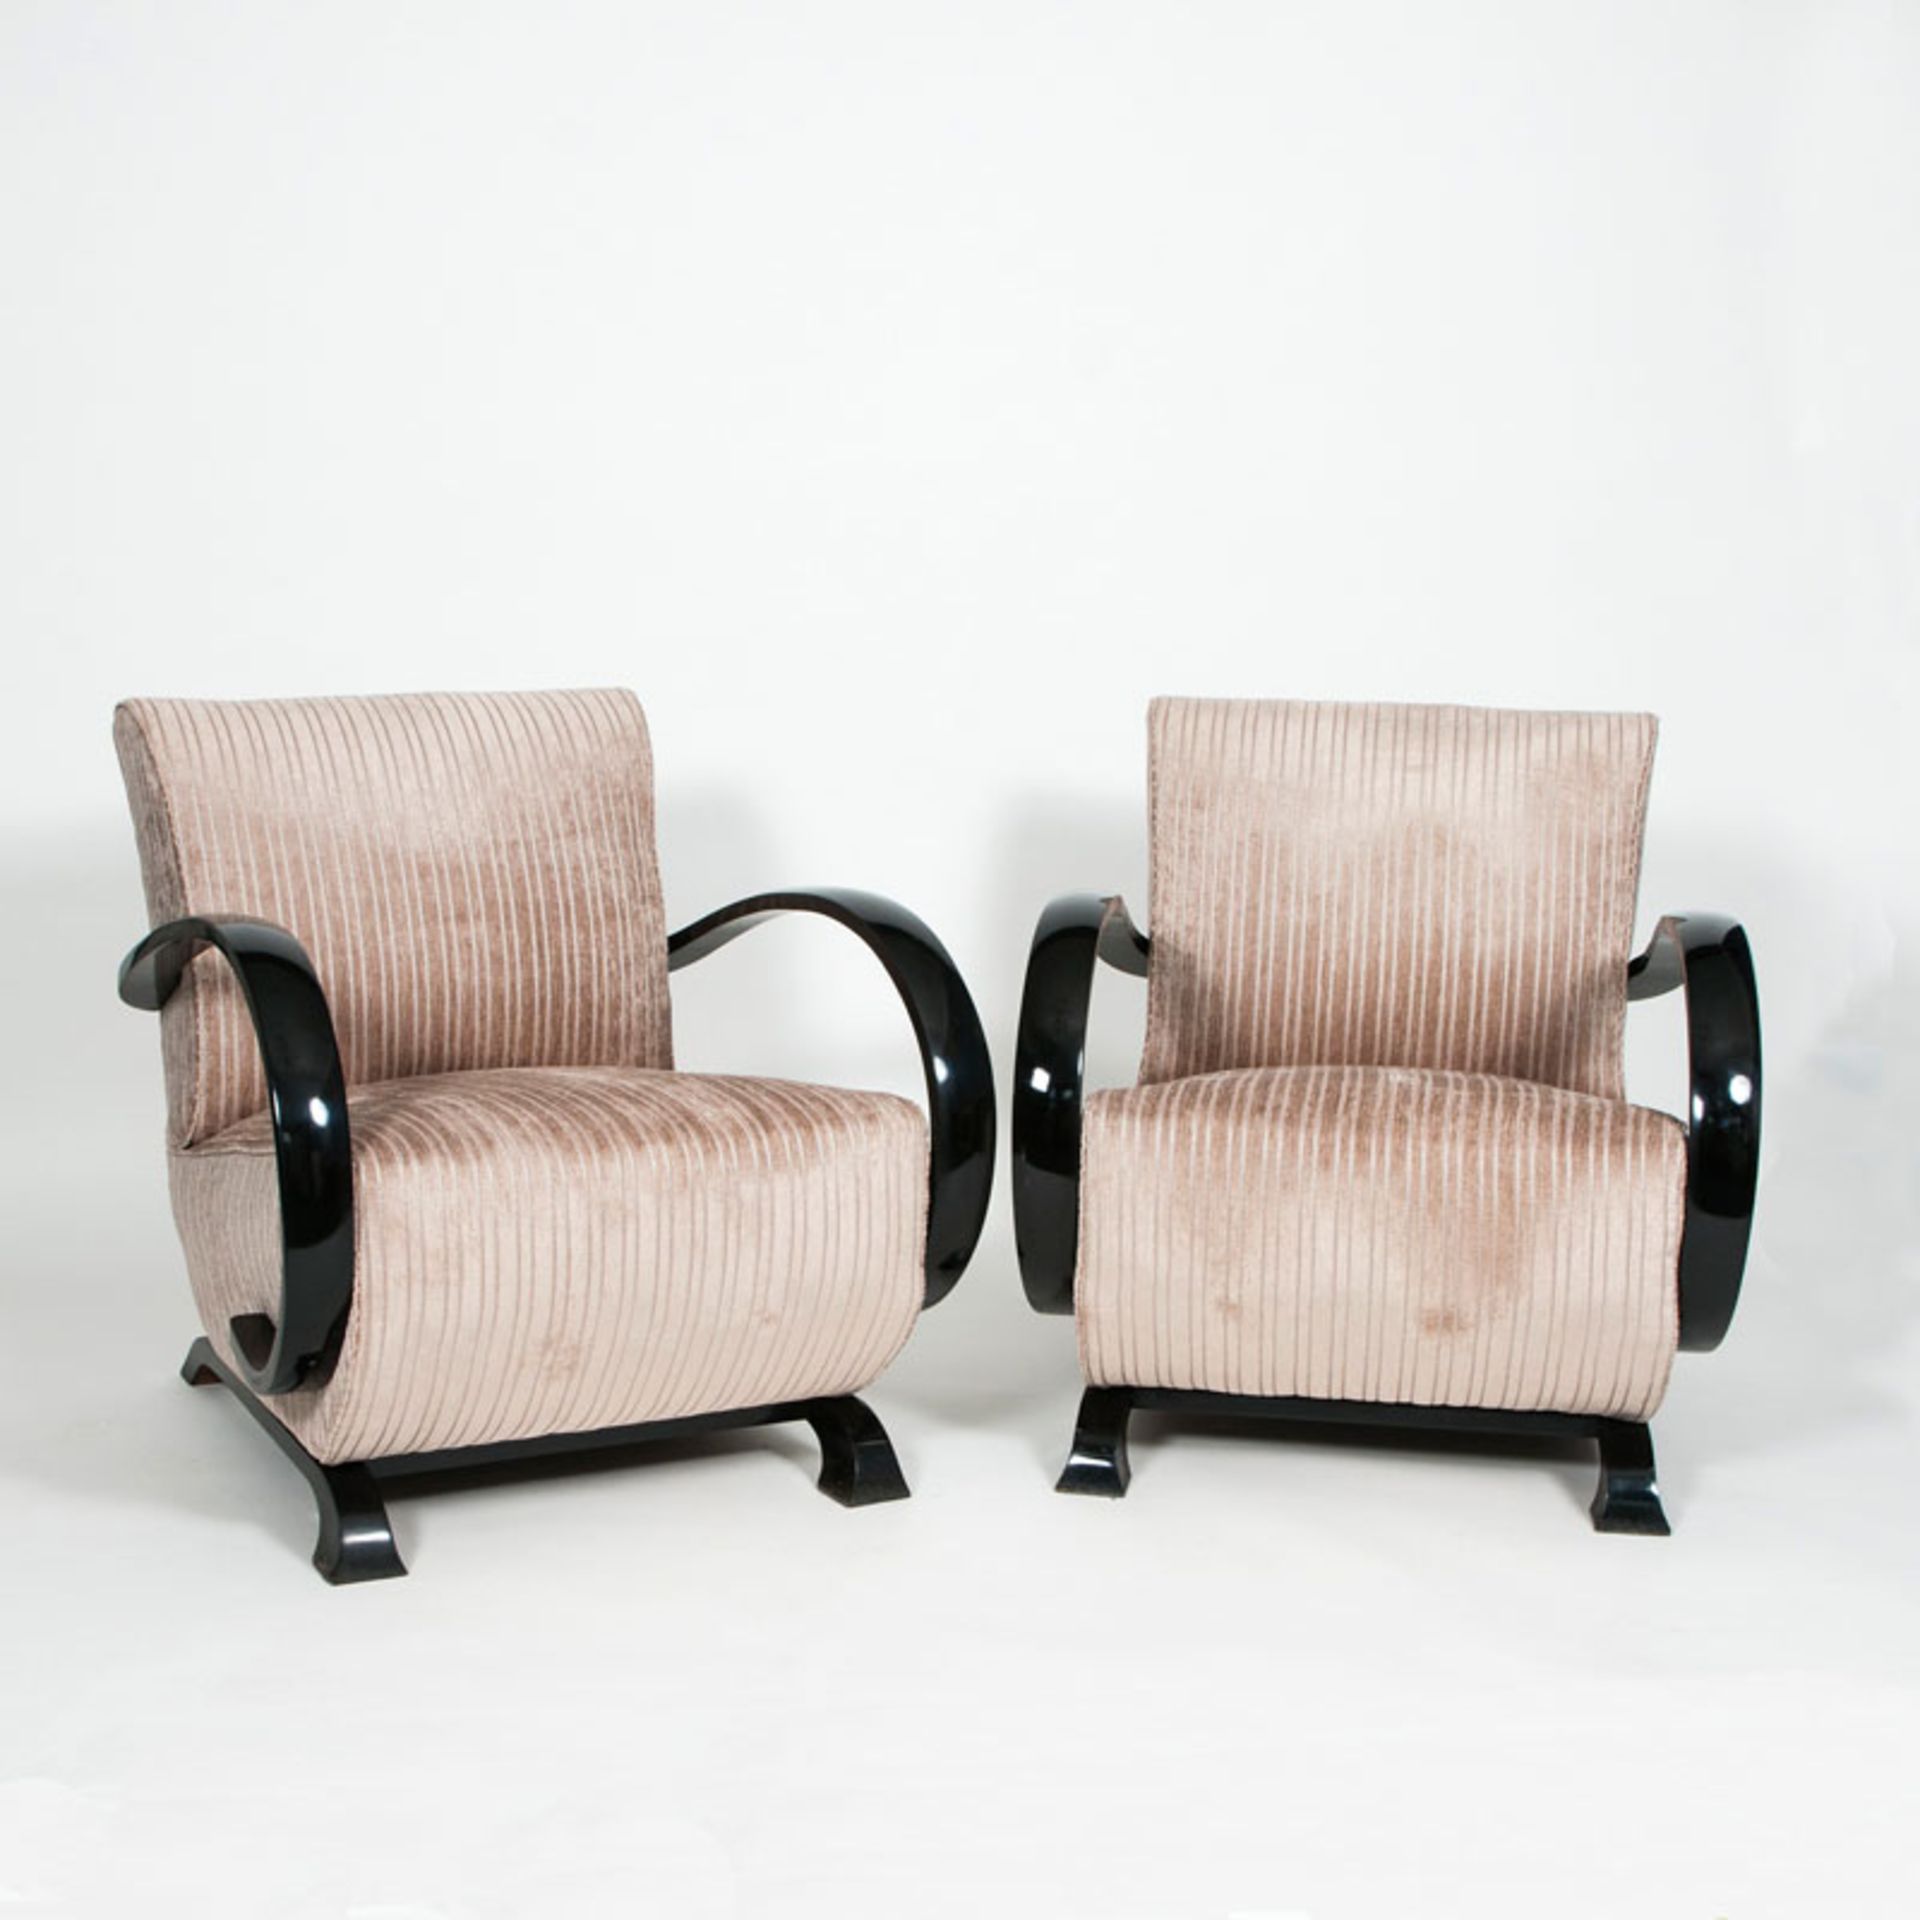 A pair of Art Déco armchairs France, around 1930. Wood with black lacquer. Seat and back upholstered